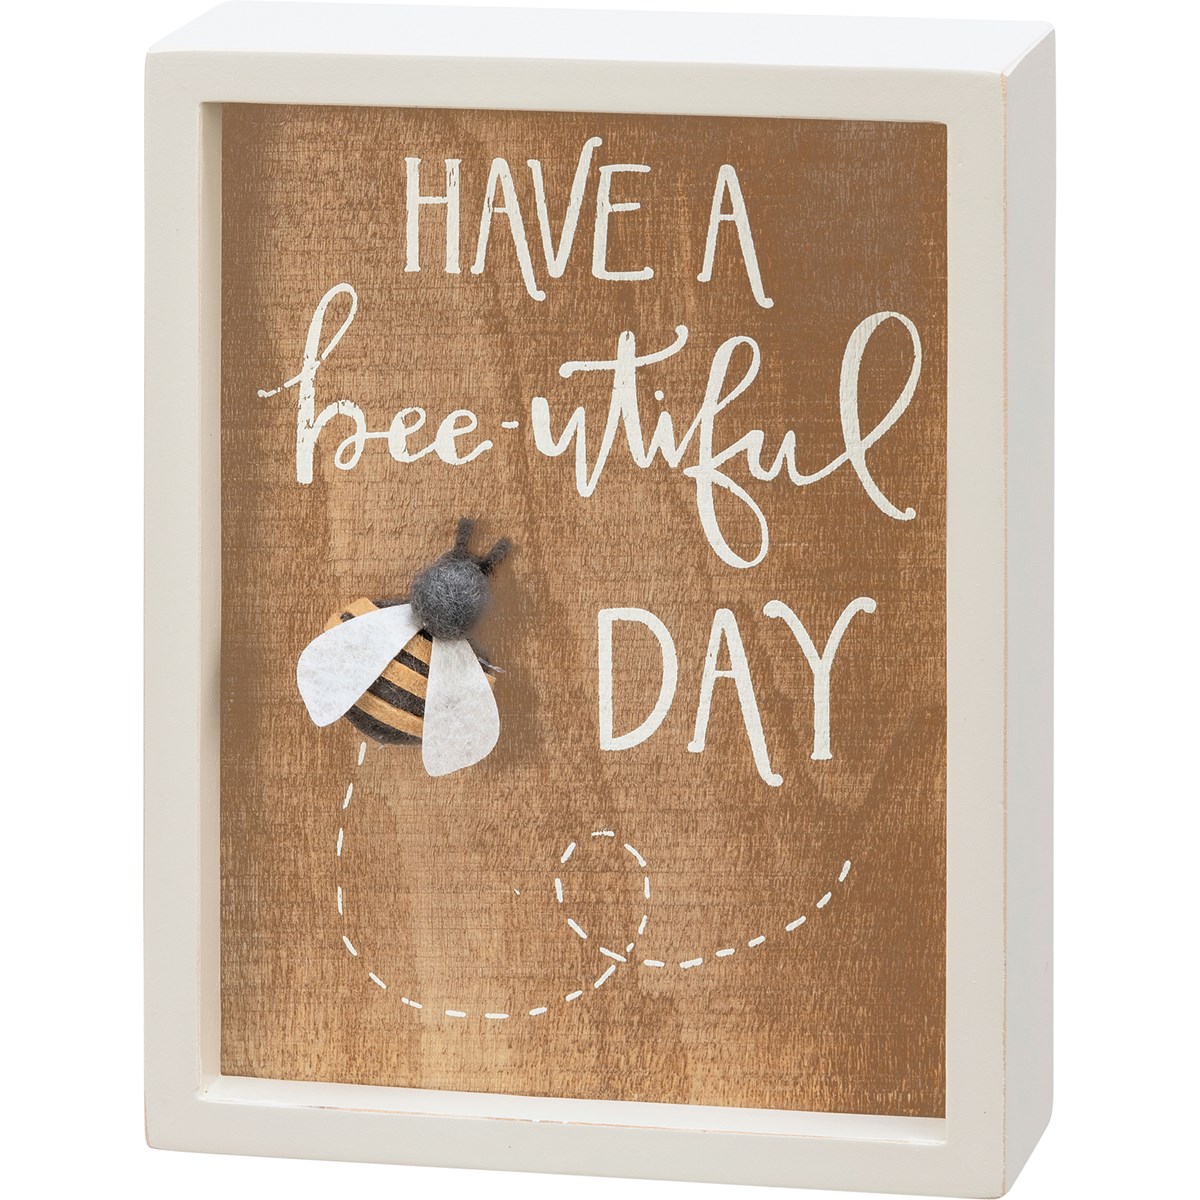 Have A Beeutiful Day Inset Box Sign - Wood, Felt